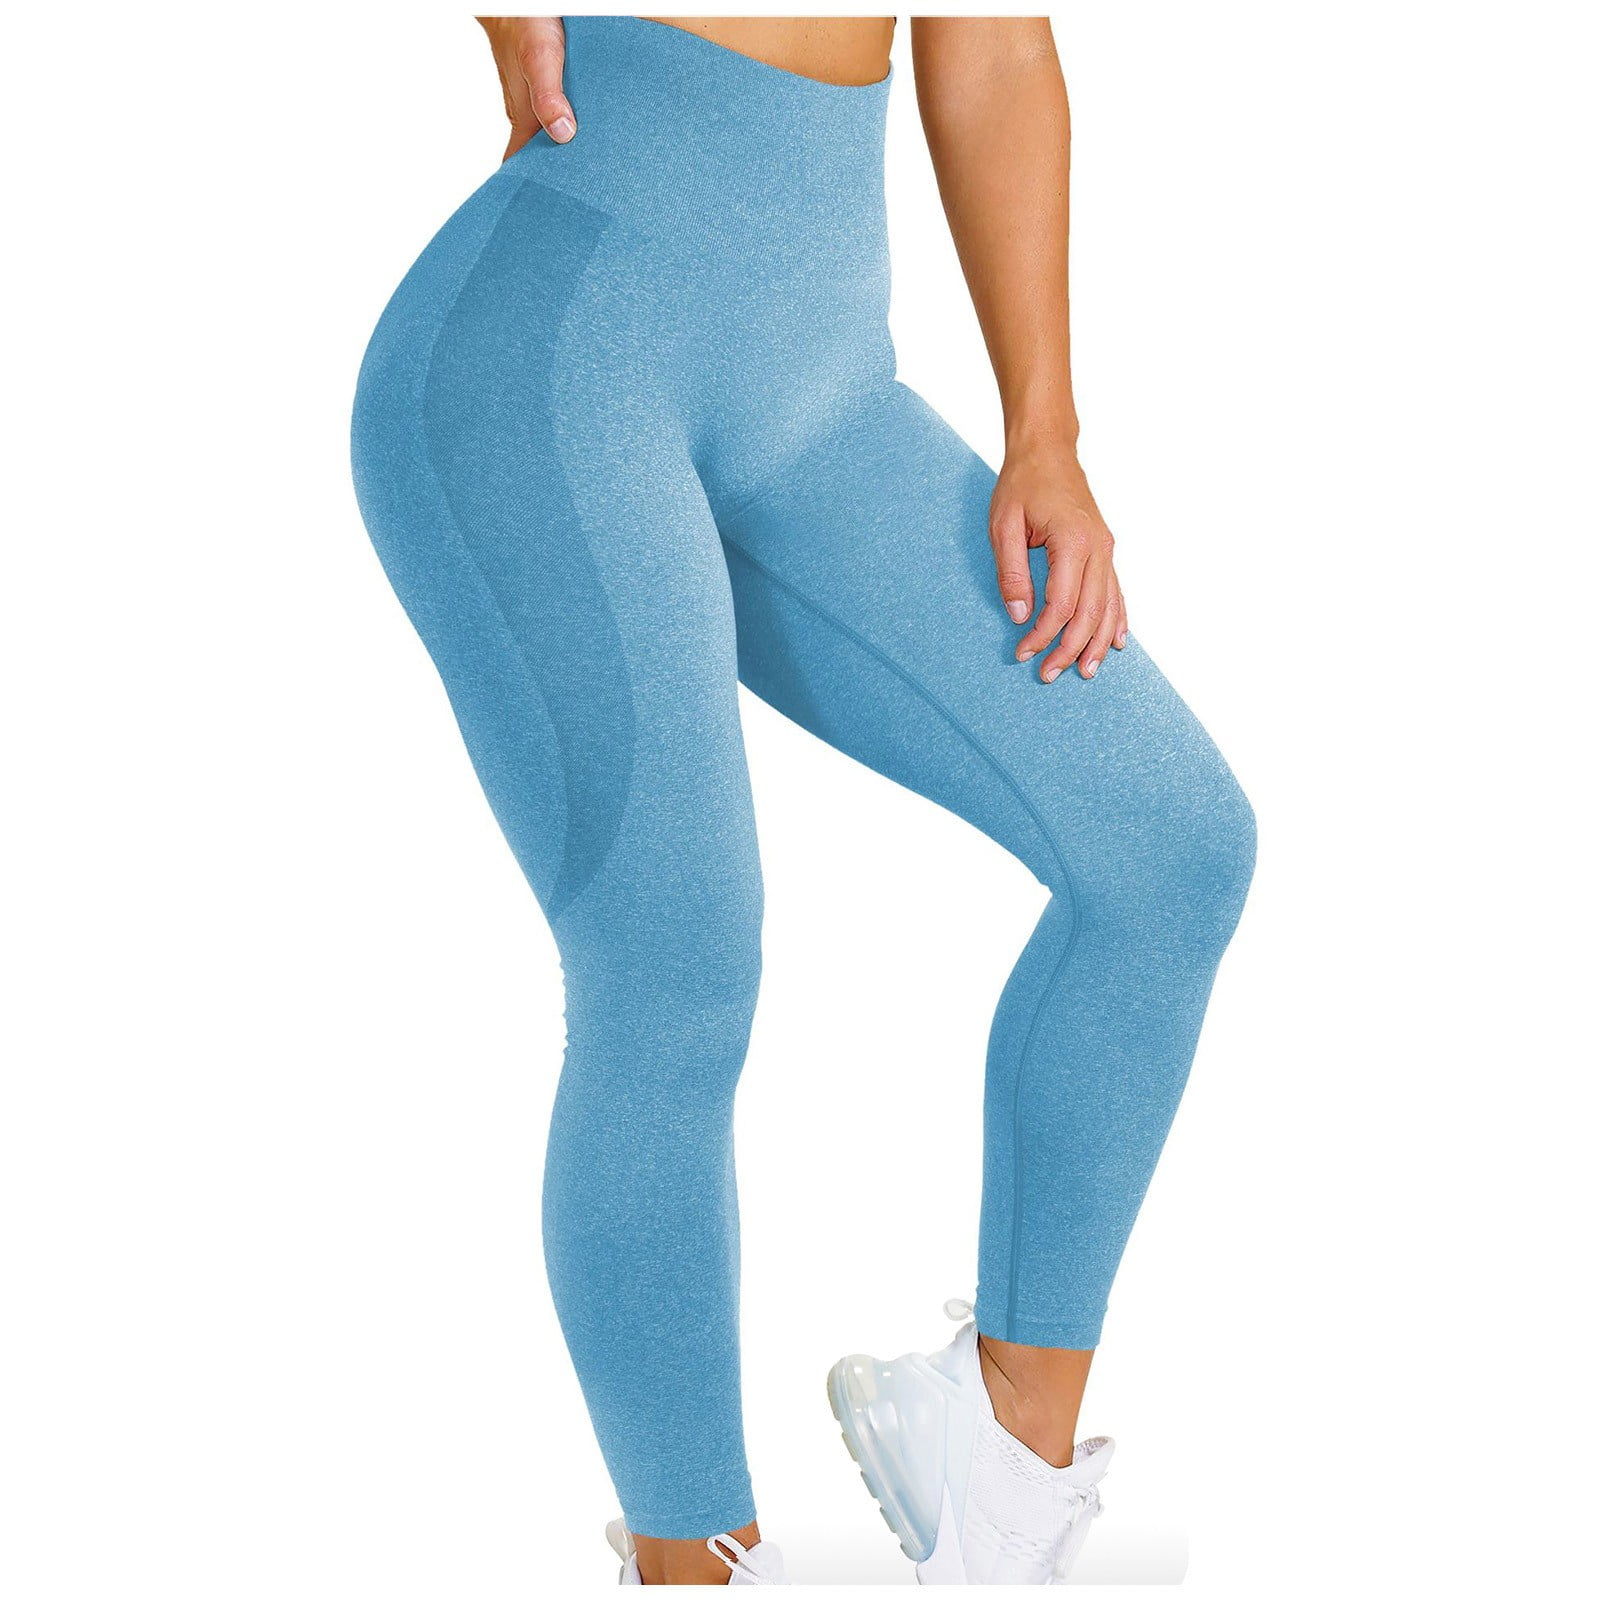 Ierhent Bootcut Yoga Pants for Women with Pockets Leggings for